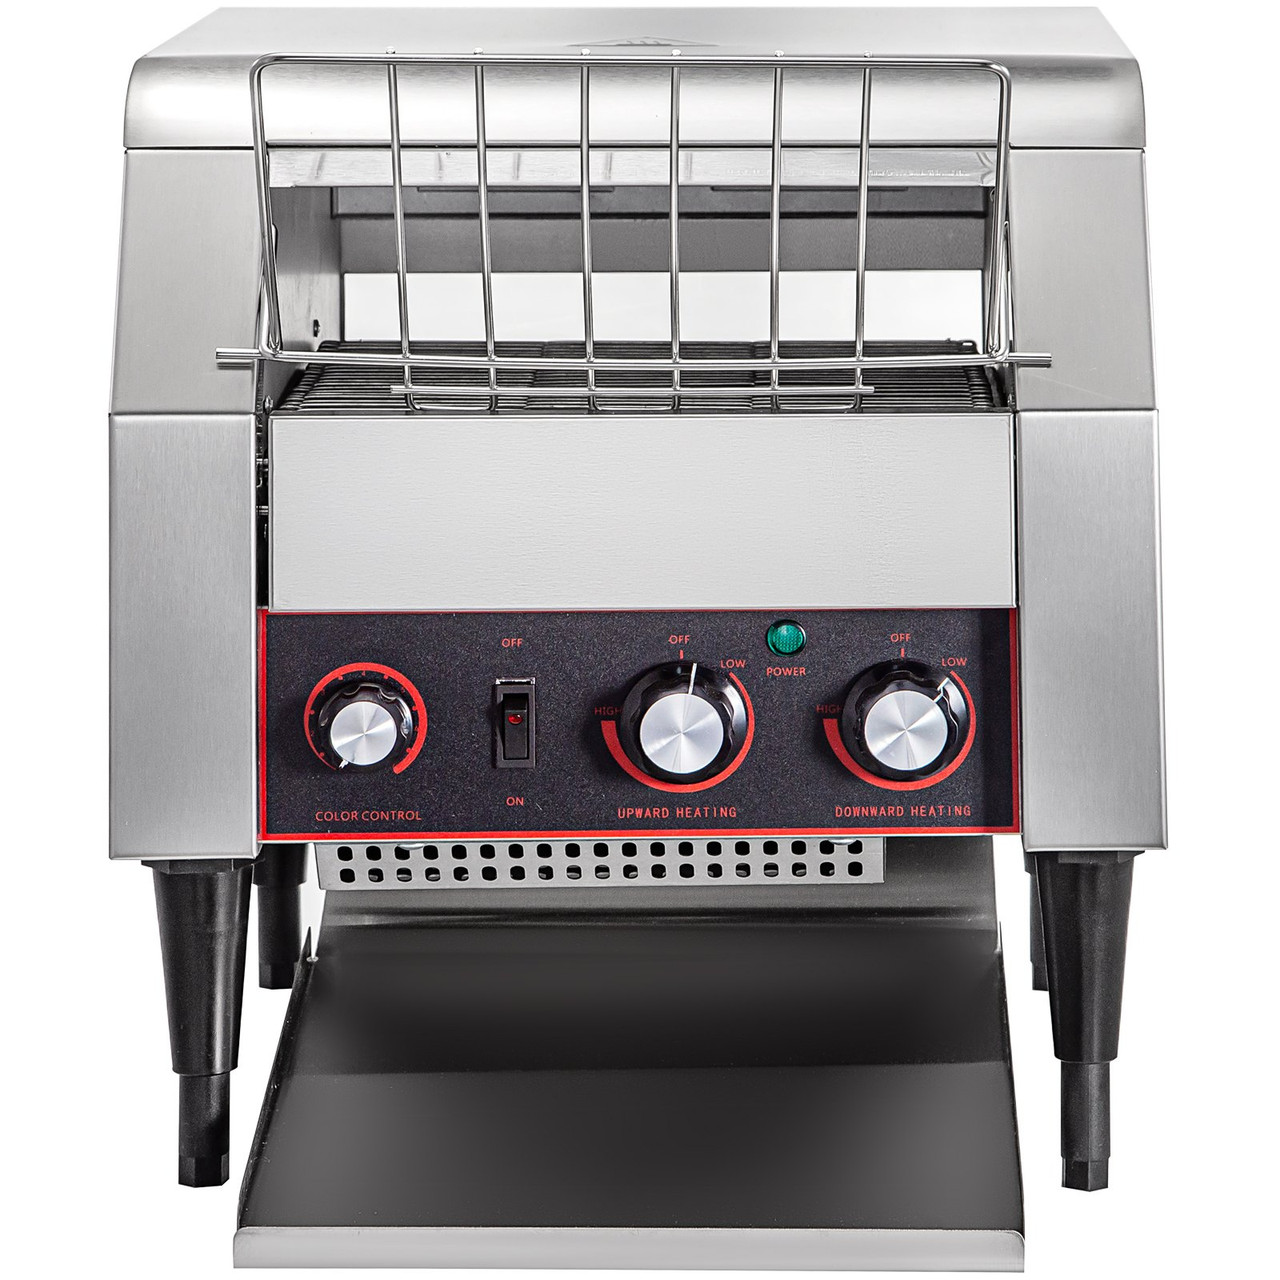 450 Slices/Hour Commercial Conveyor Toaster,2600W Stainless Steel Heavy Duty Industrial Toasters w/ Double Heating Tubes,Countertop Electric